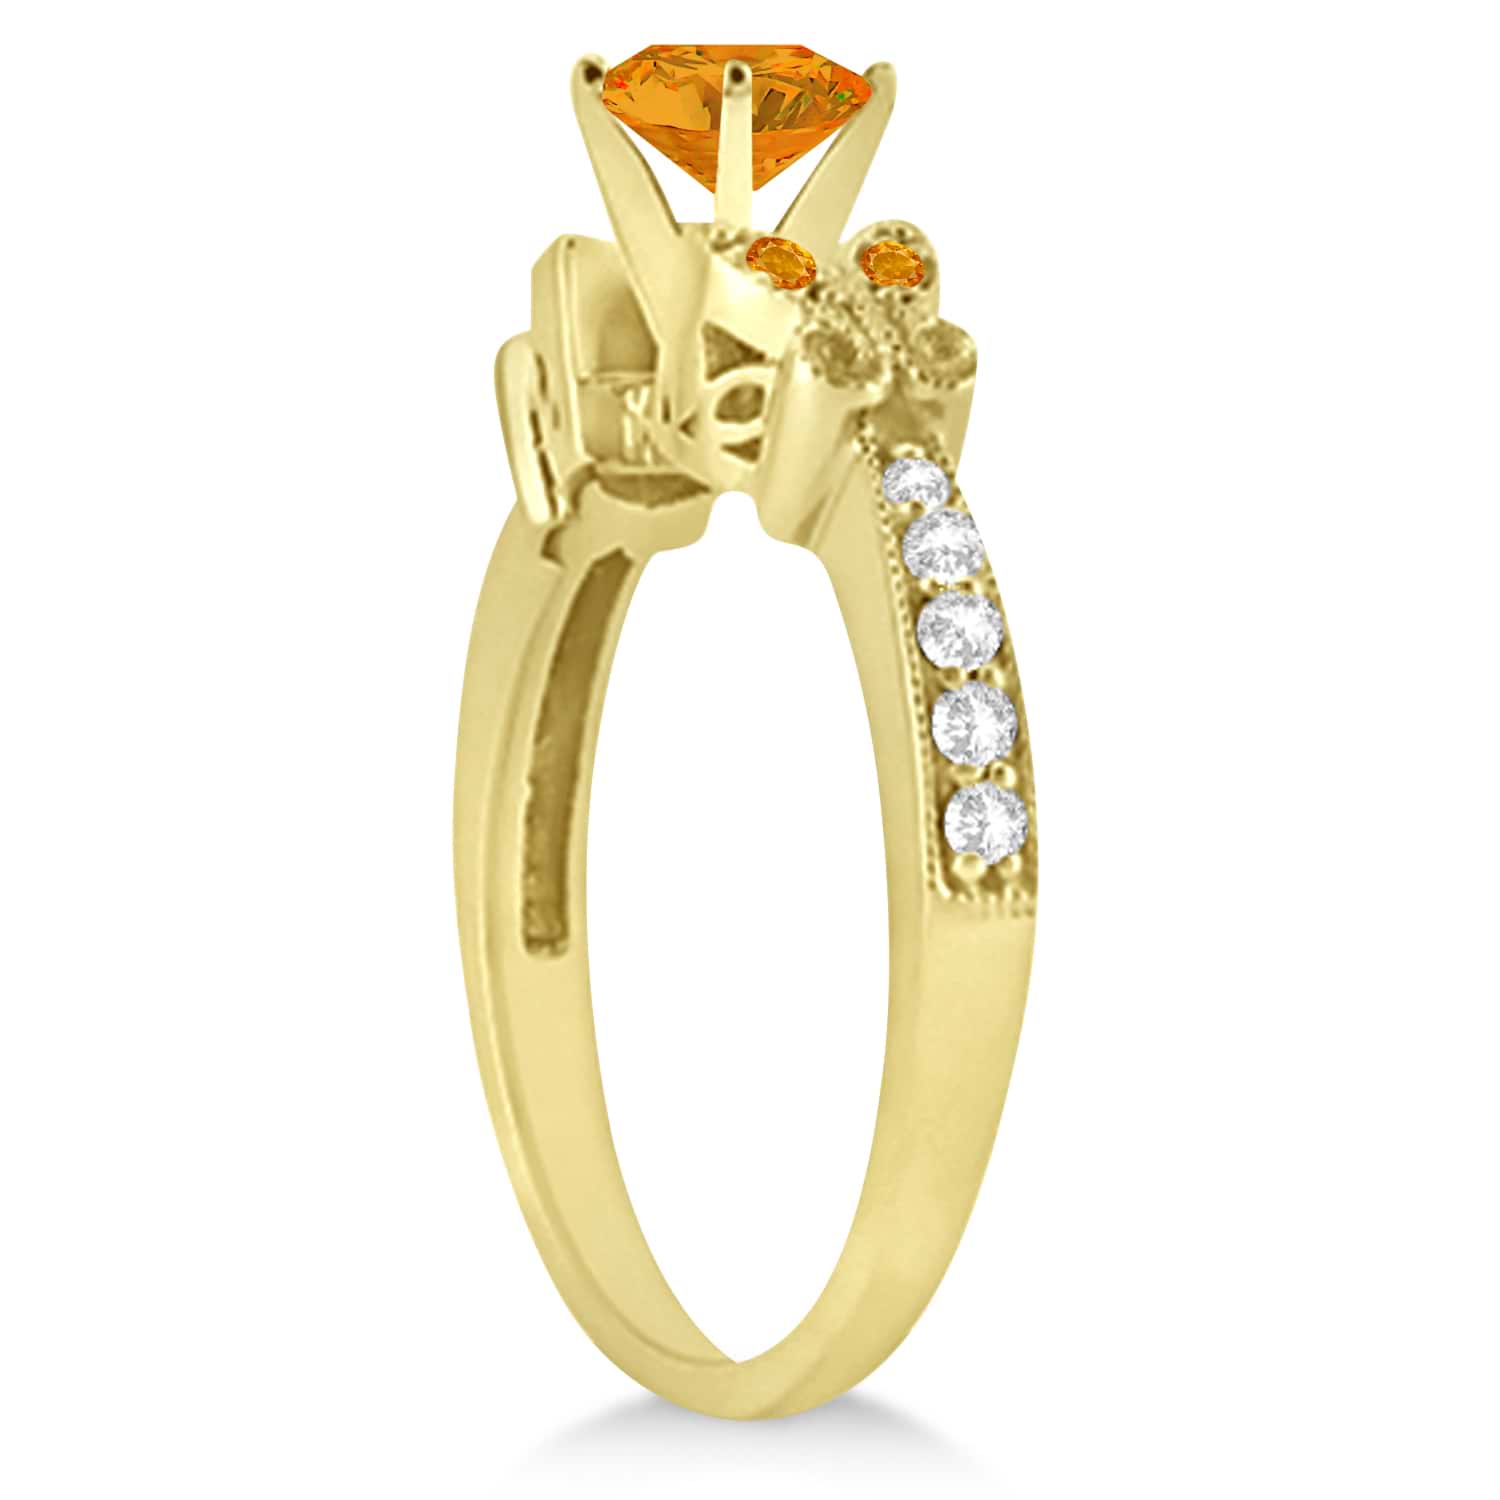 Butterfly Genuine Citrine & Diamond Engagement Ring 18K Yellow Gold 0.88ct